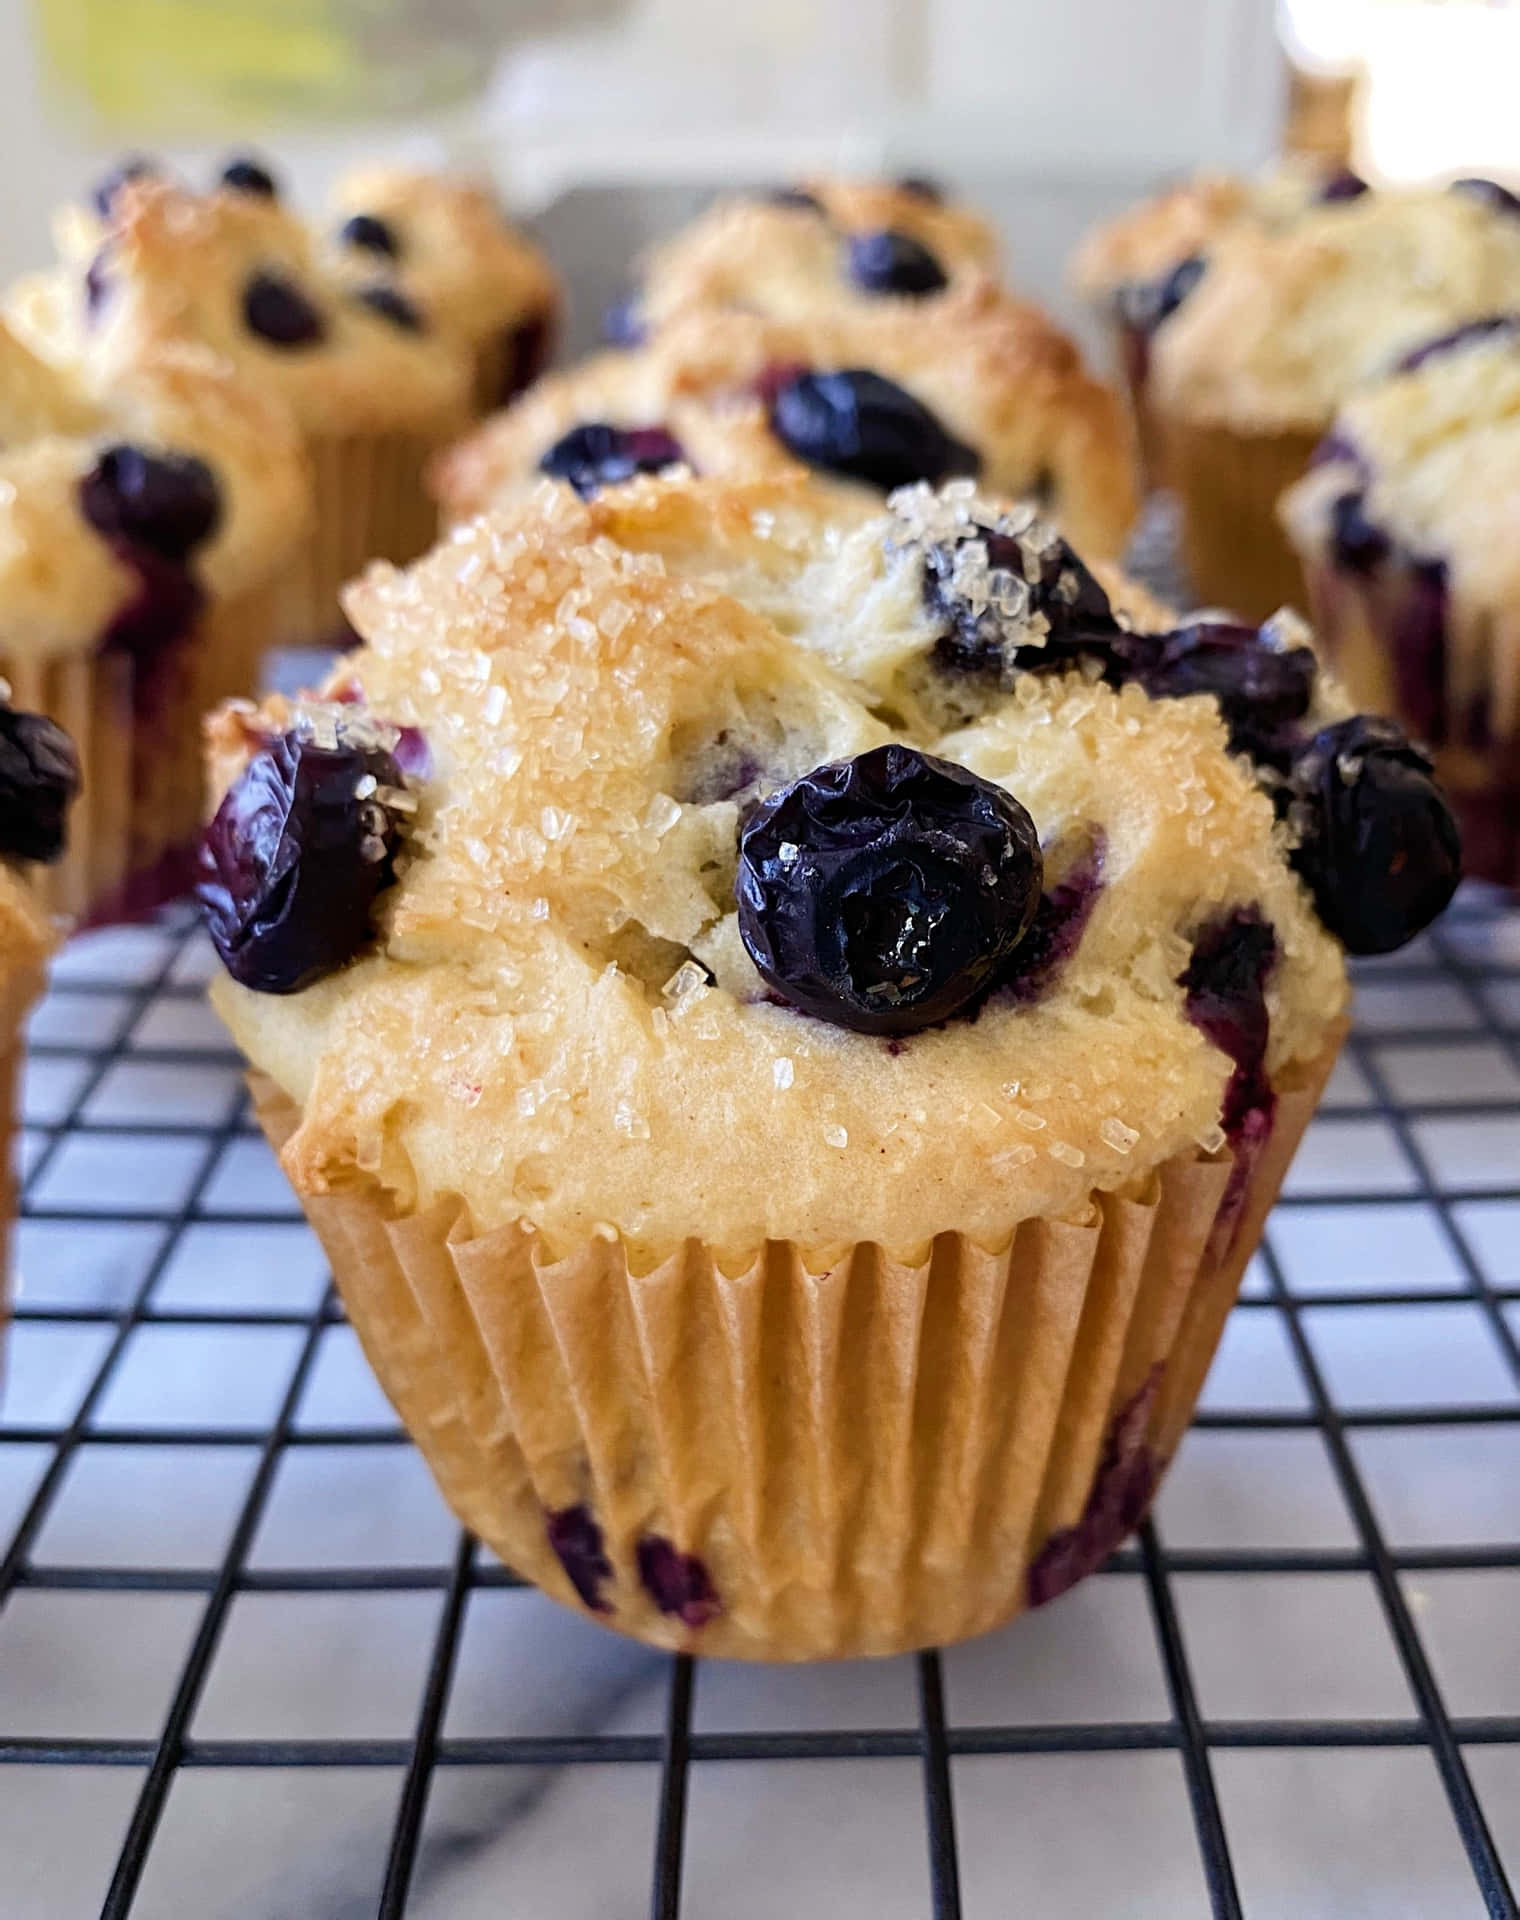 Delicious Blueberry Muffins to brighten up your day! Wallpaper